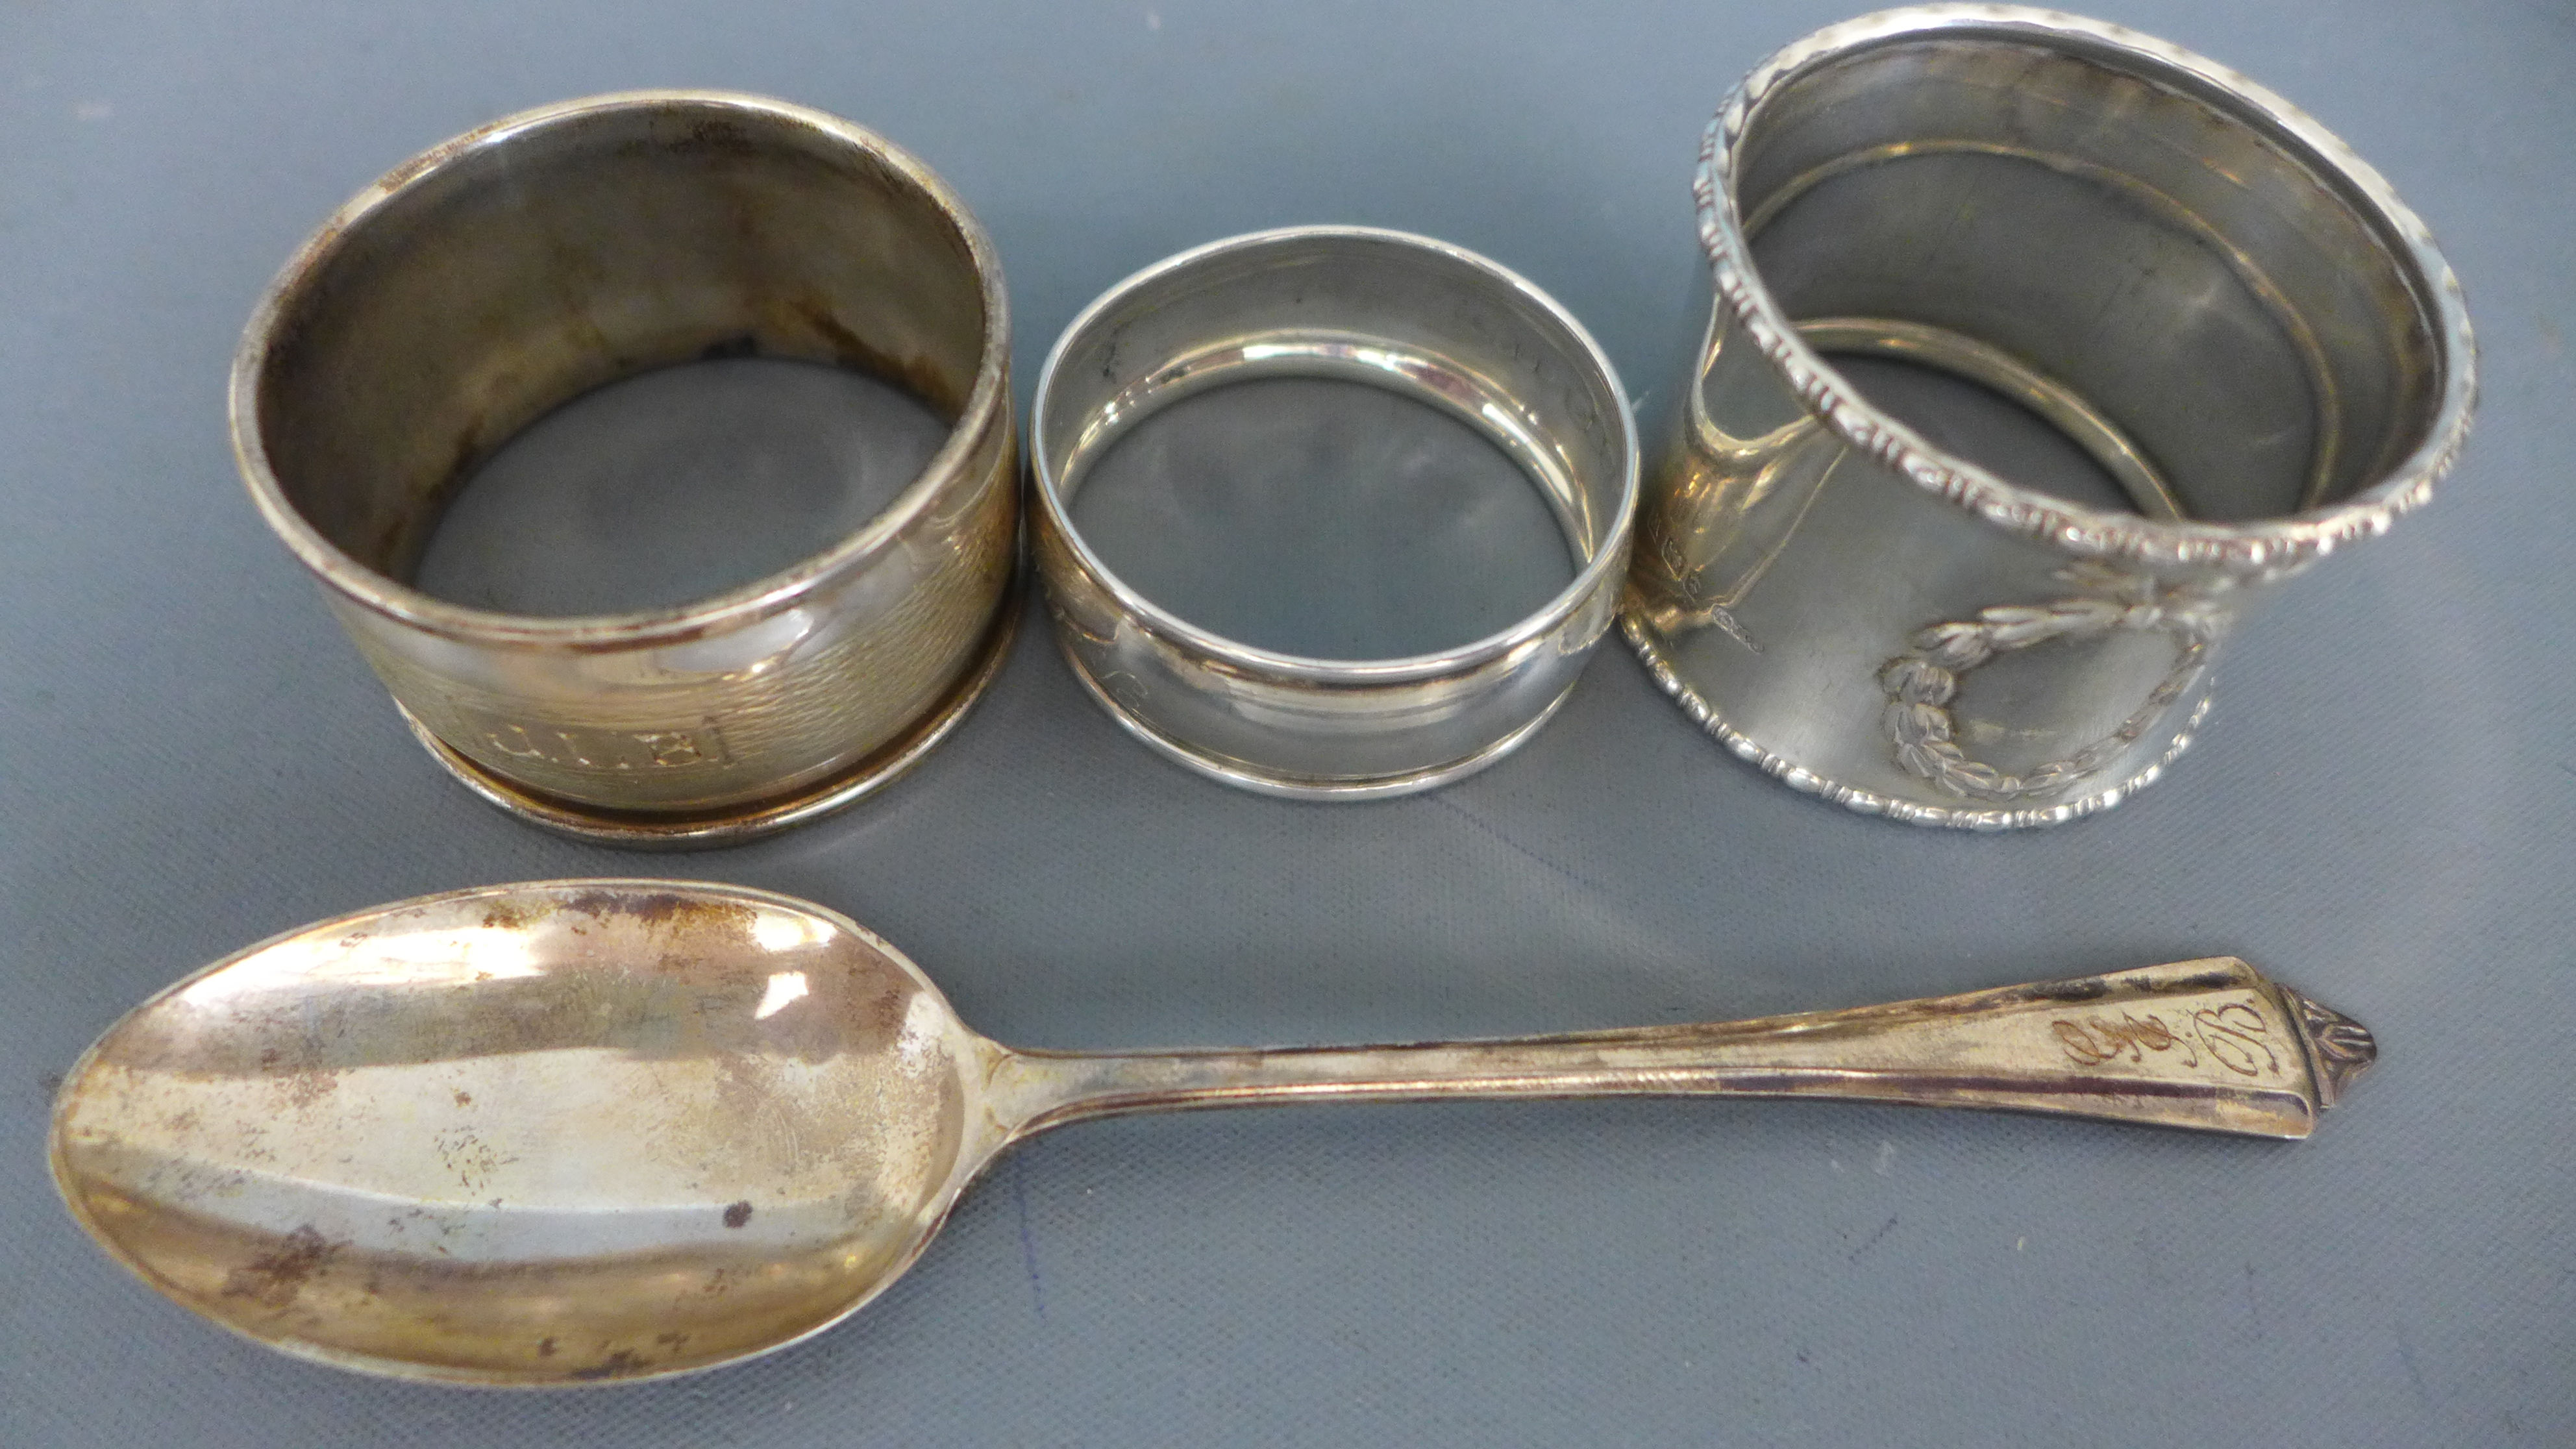 Three silver hallmarked napkin rings and a silver hallmarked teaspoon - approx weight 1. - Image 2 of 2